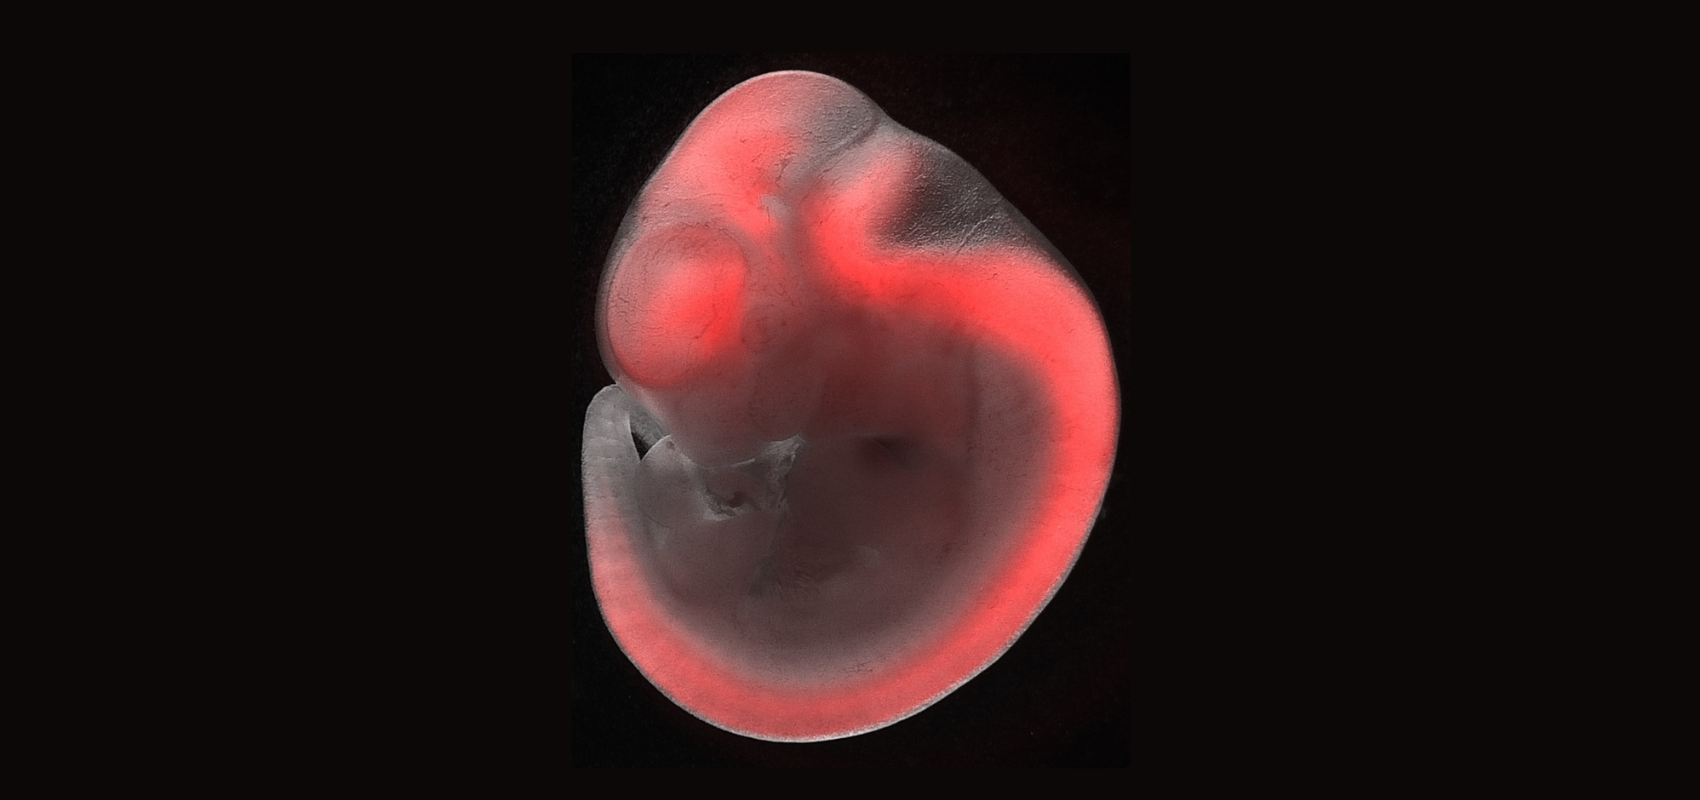 Image of a developing mouse embryo.